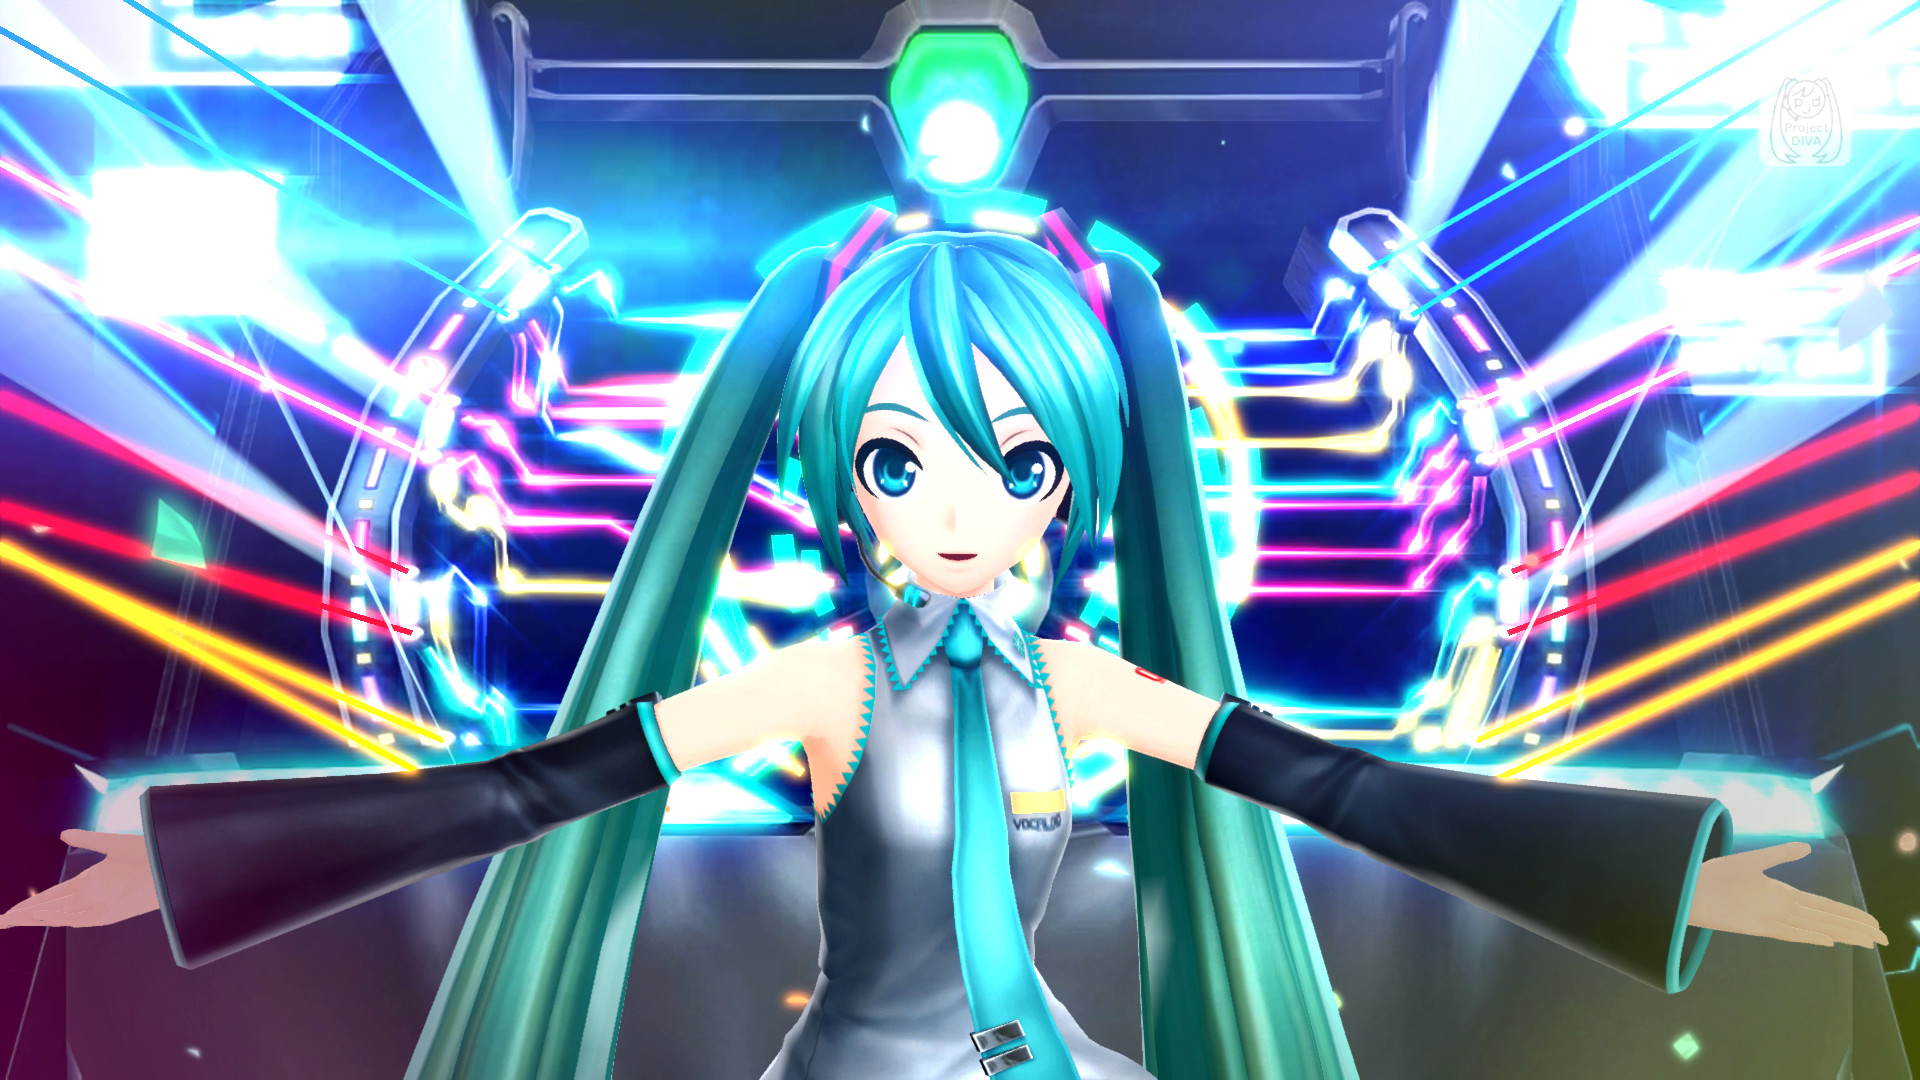 1920x1080 "Hatsune Miku Project Diva Wallpaper (80+ images)" — card from user  Yarosvet.x in Yandex.Collections